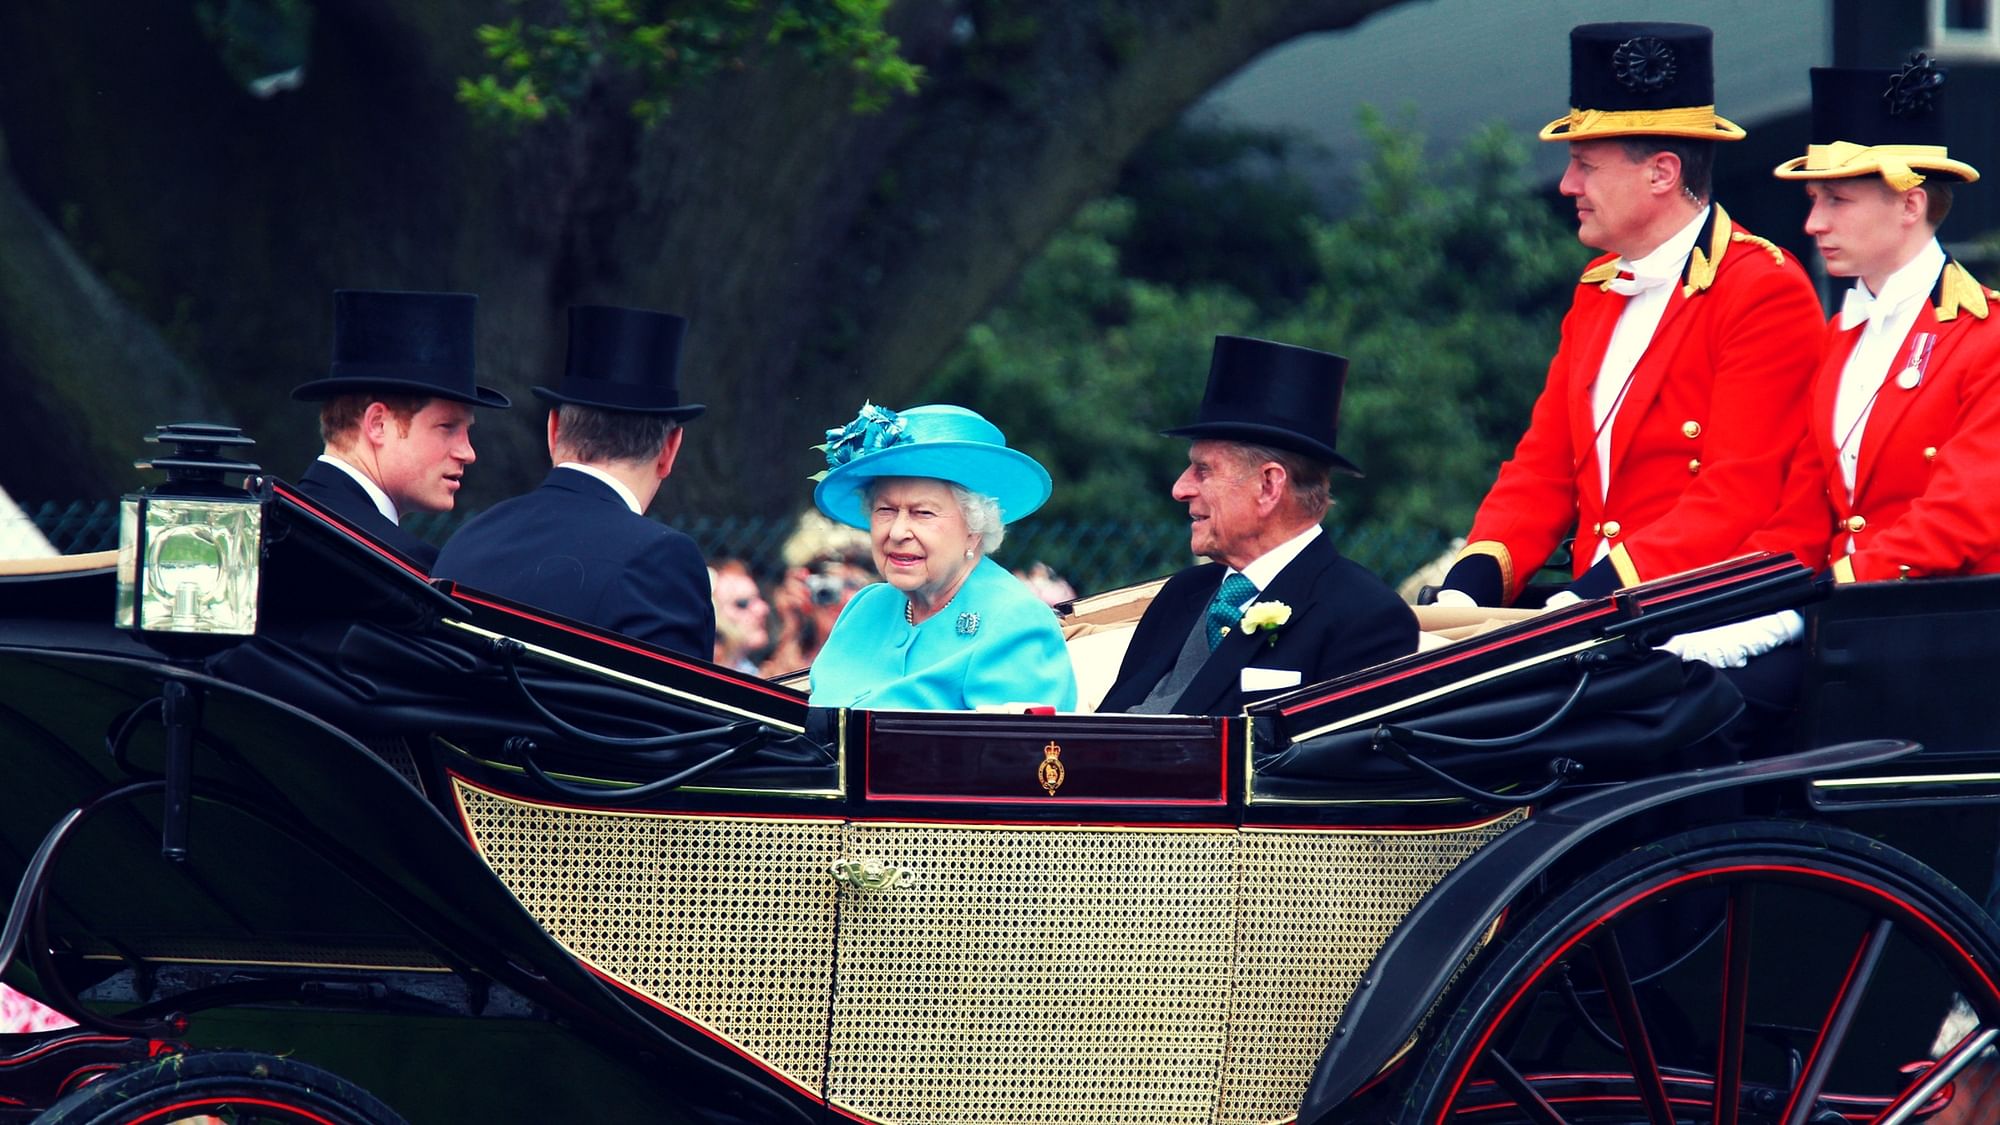 The Queen is never happier than when watching ‘the sport of kings’ (especially when one of her horses wins!). (Photo Courtesy: Shutterstock)